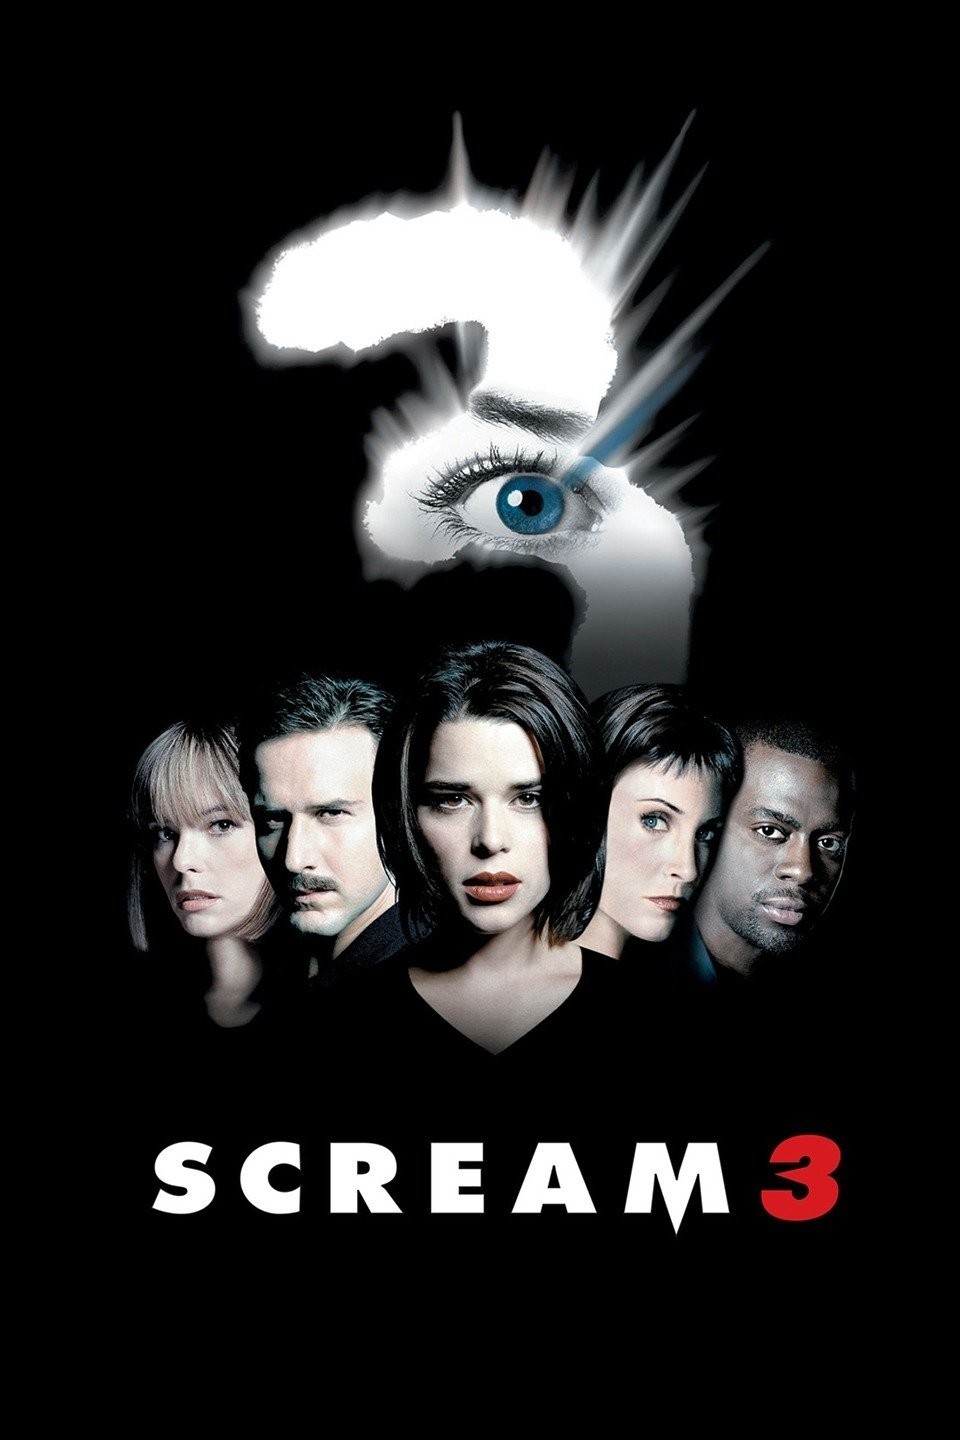 Ice scream 3 comic is cancelled